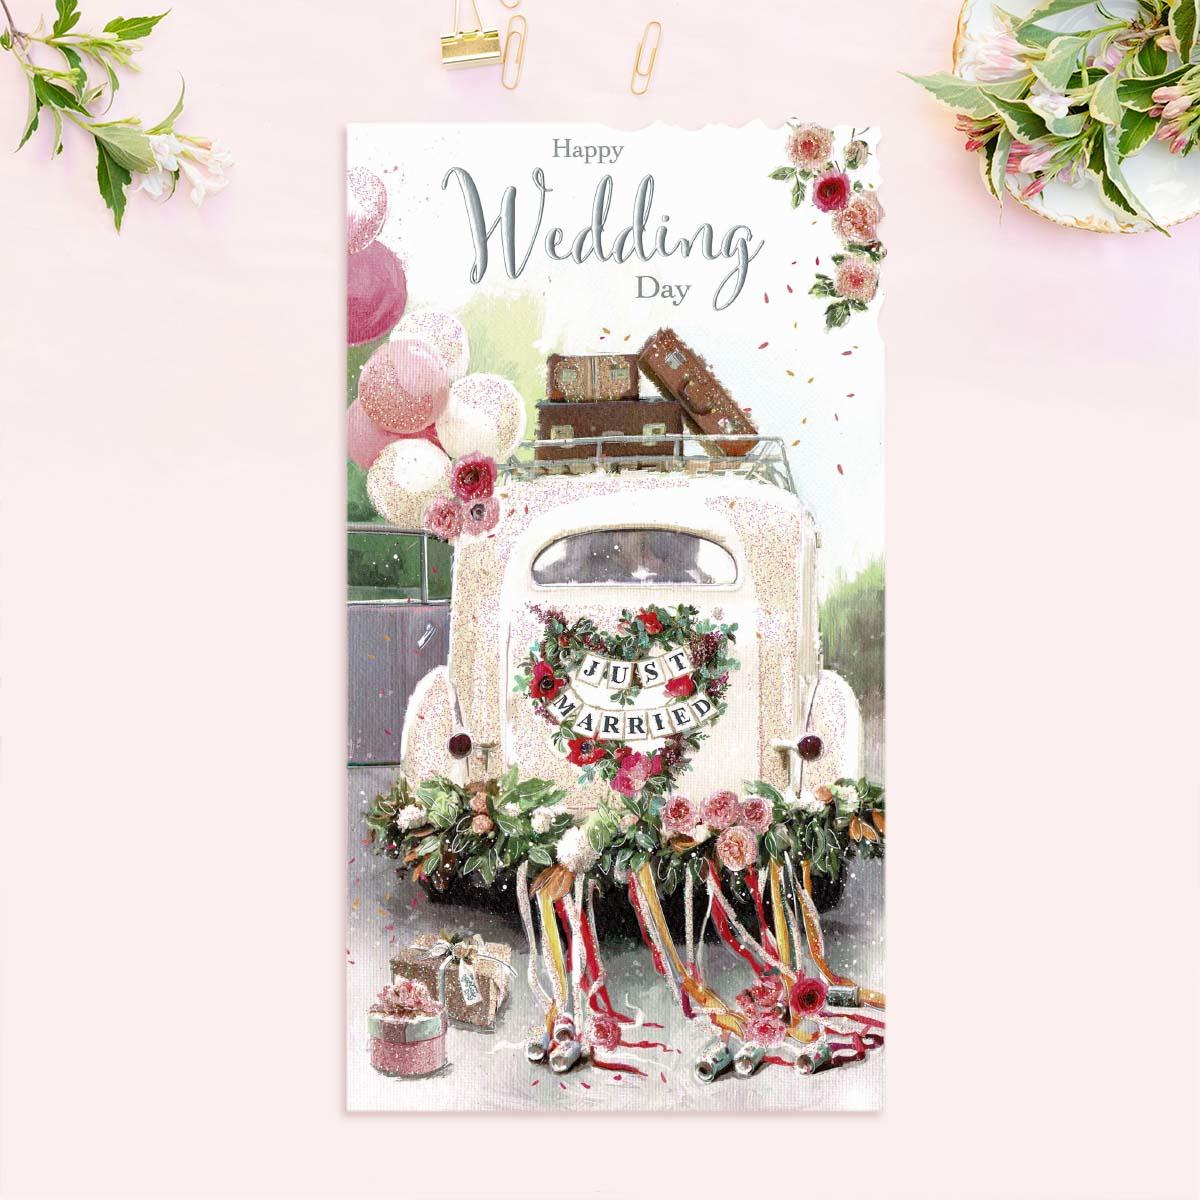 Wedding Day Just Married Card Front Image